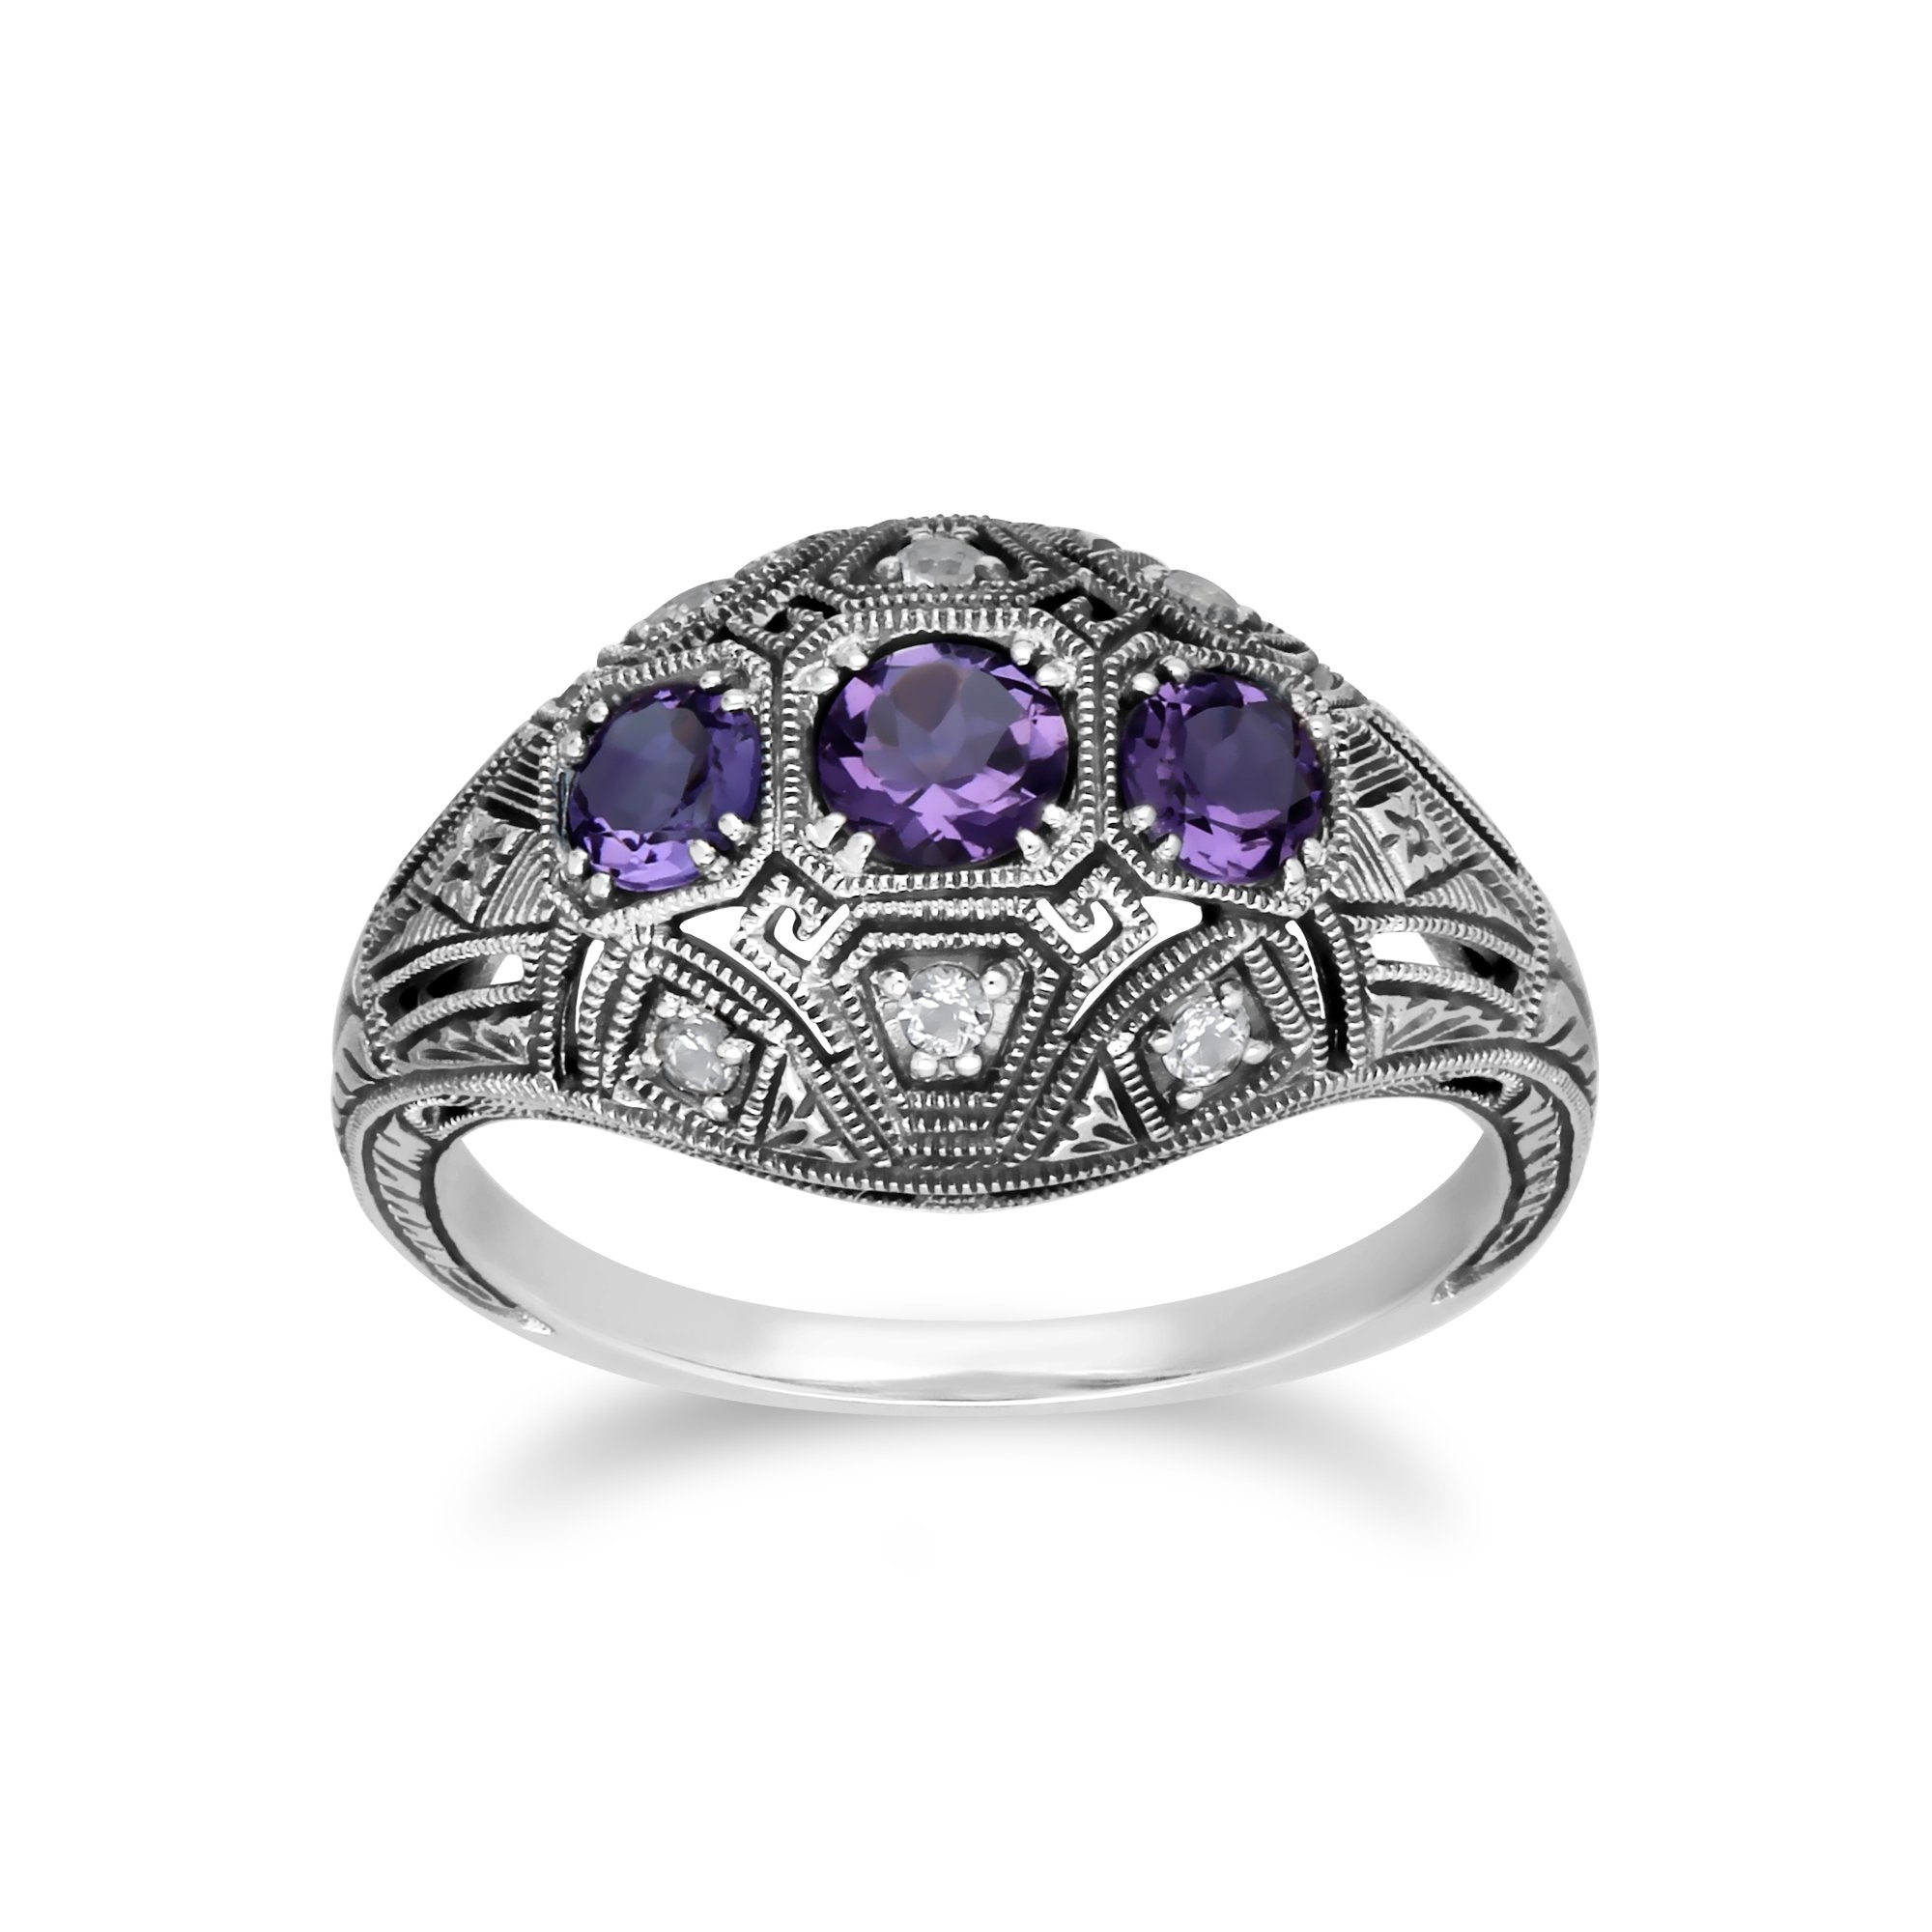 Art Deco Style Round Amethyst & White Topaz Three Stone Ring in Sterling Silver